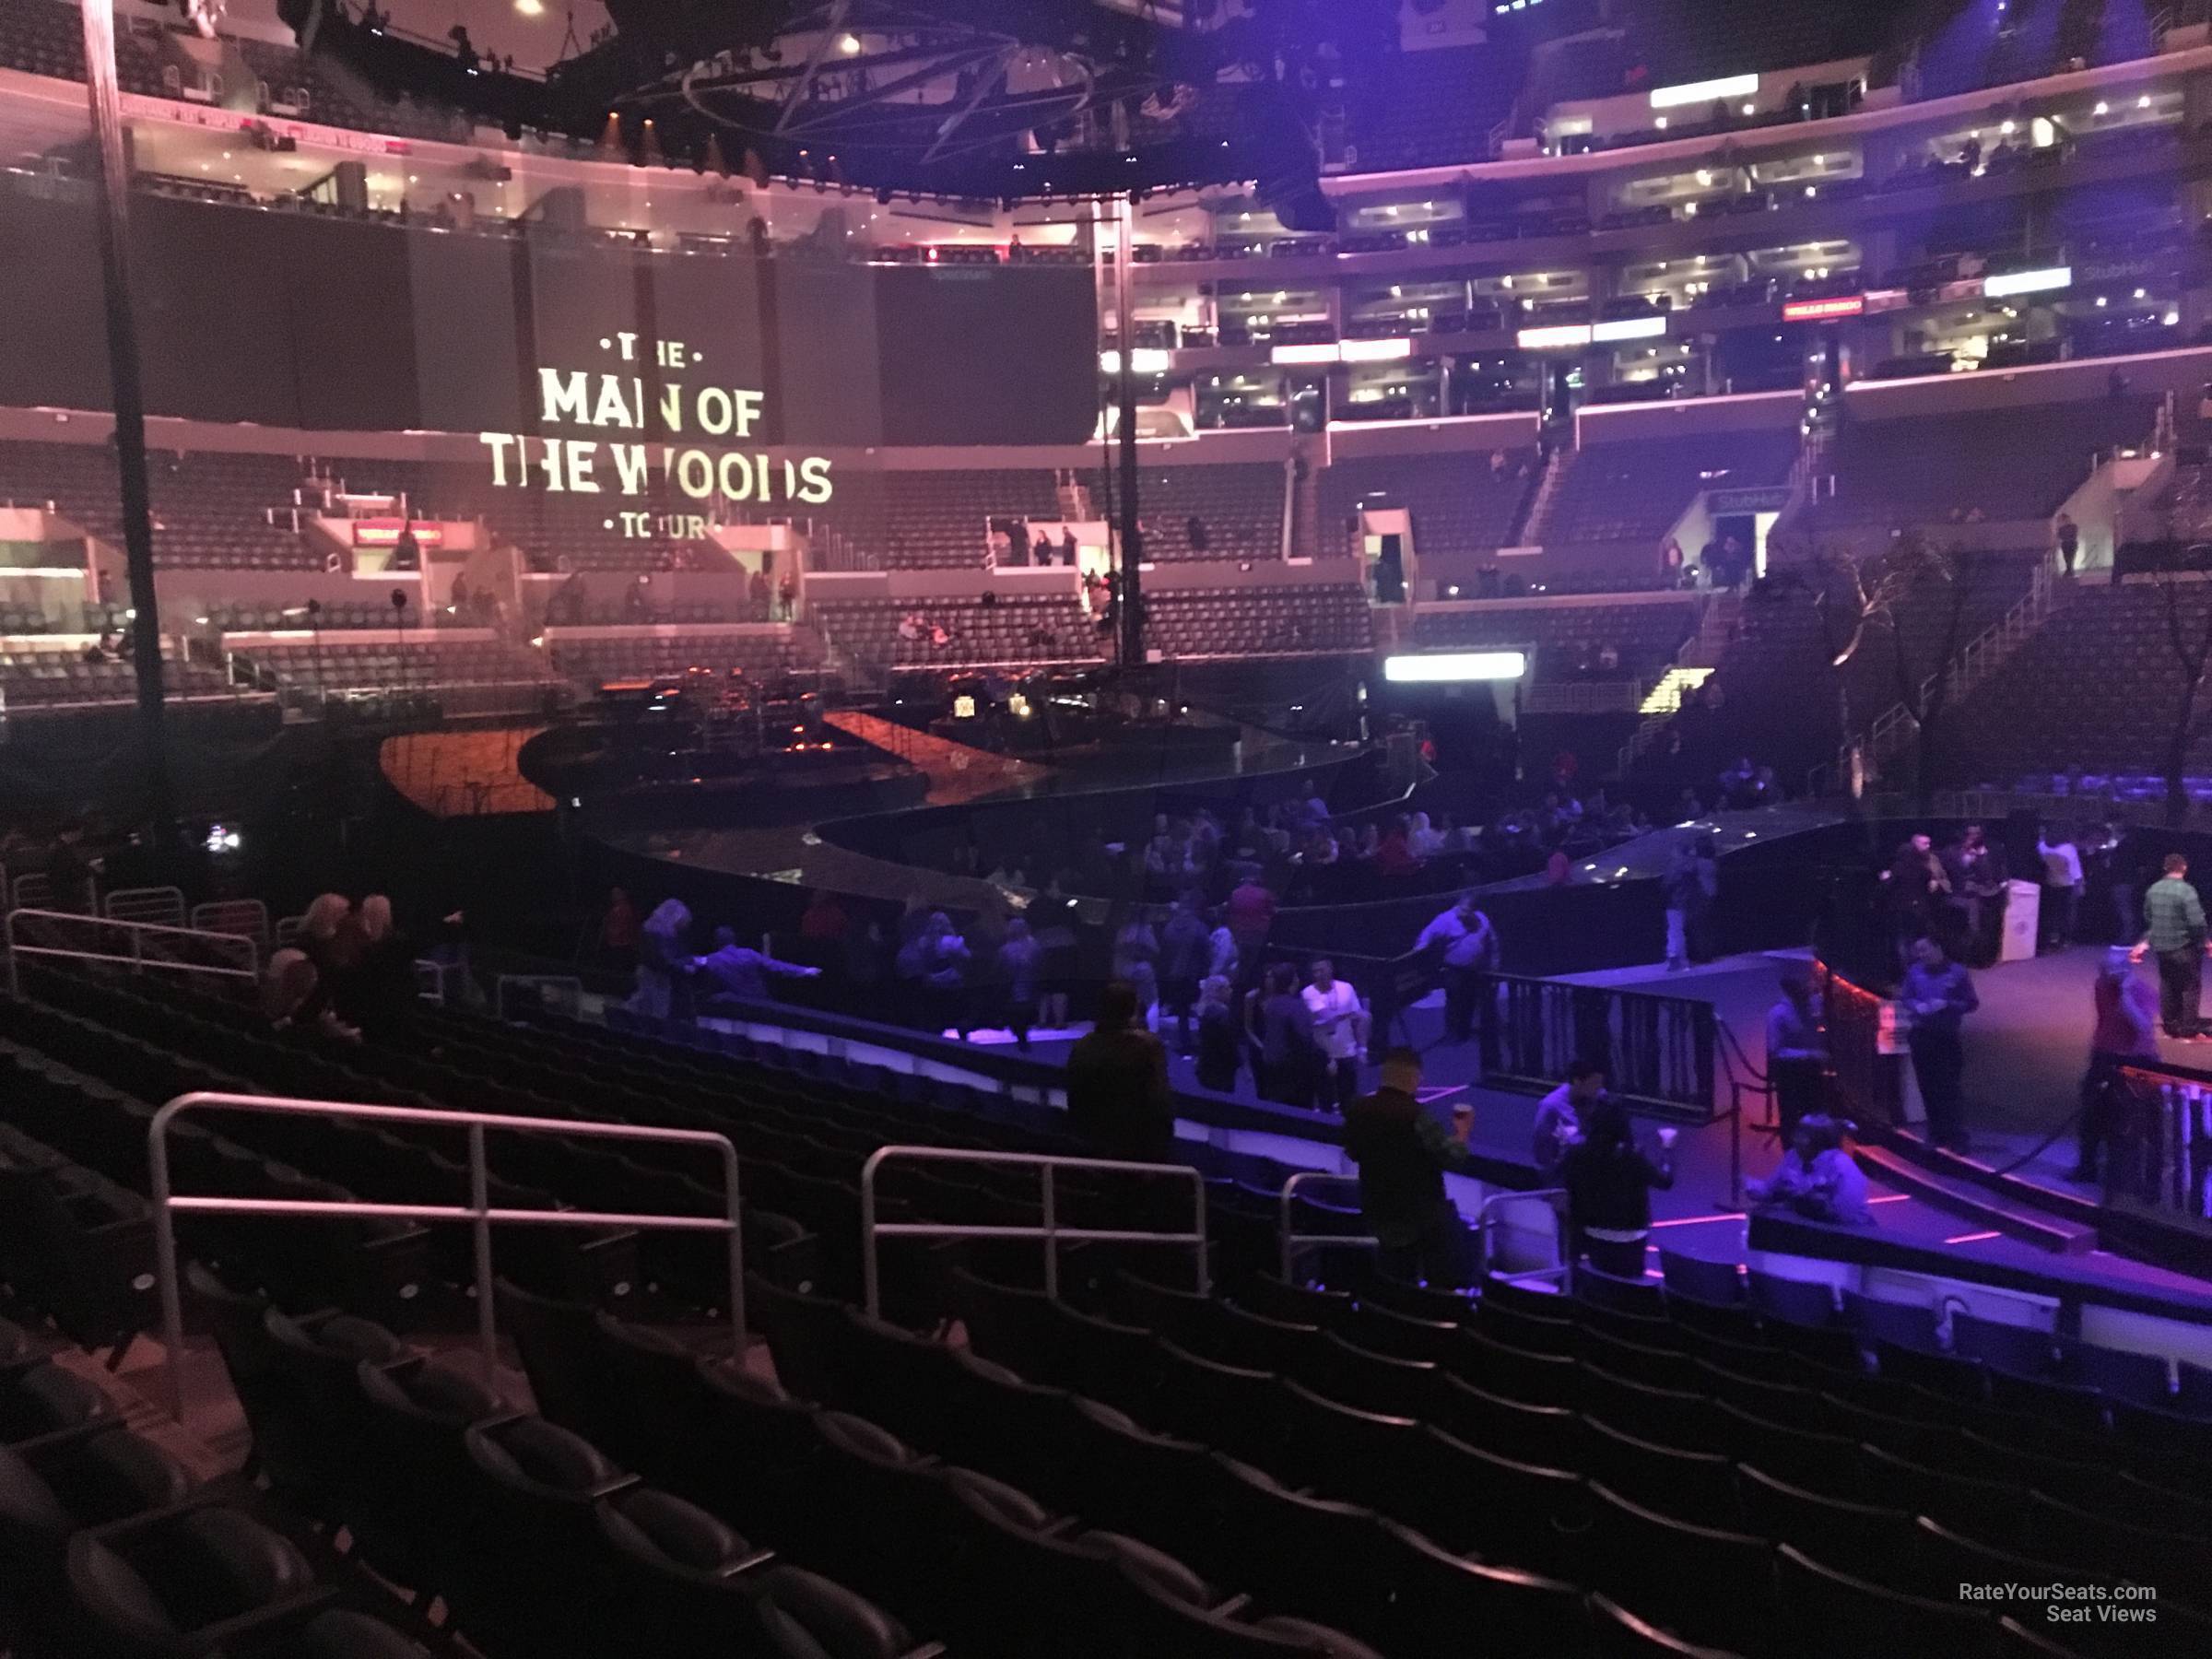 section 112, row 15 seat view  for concert - crypto.com arena